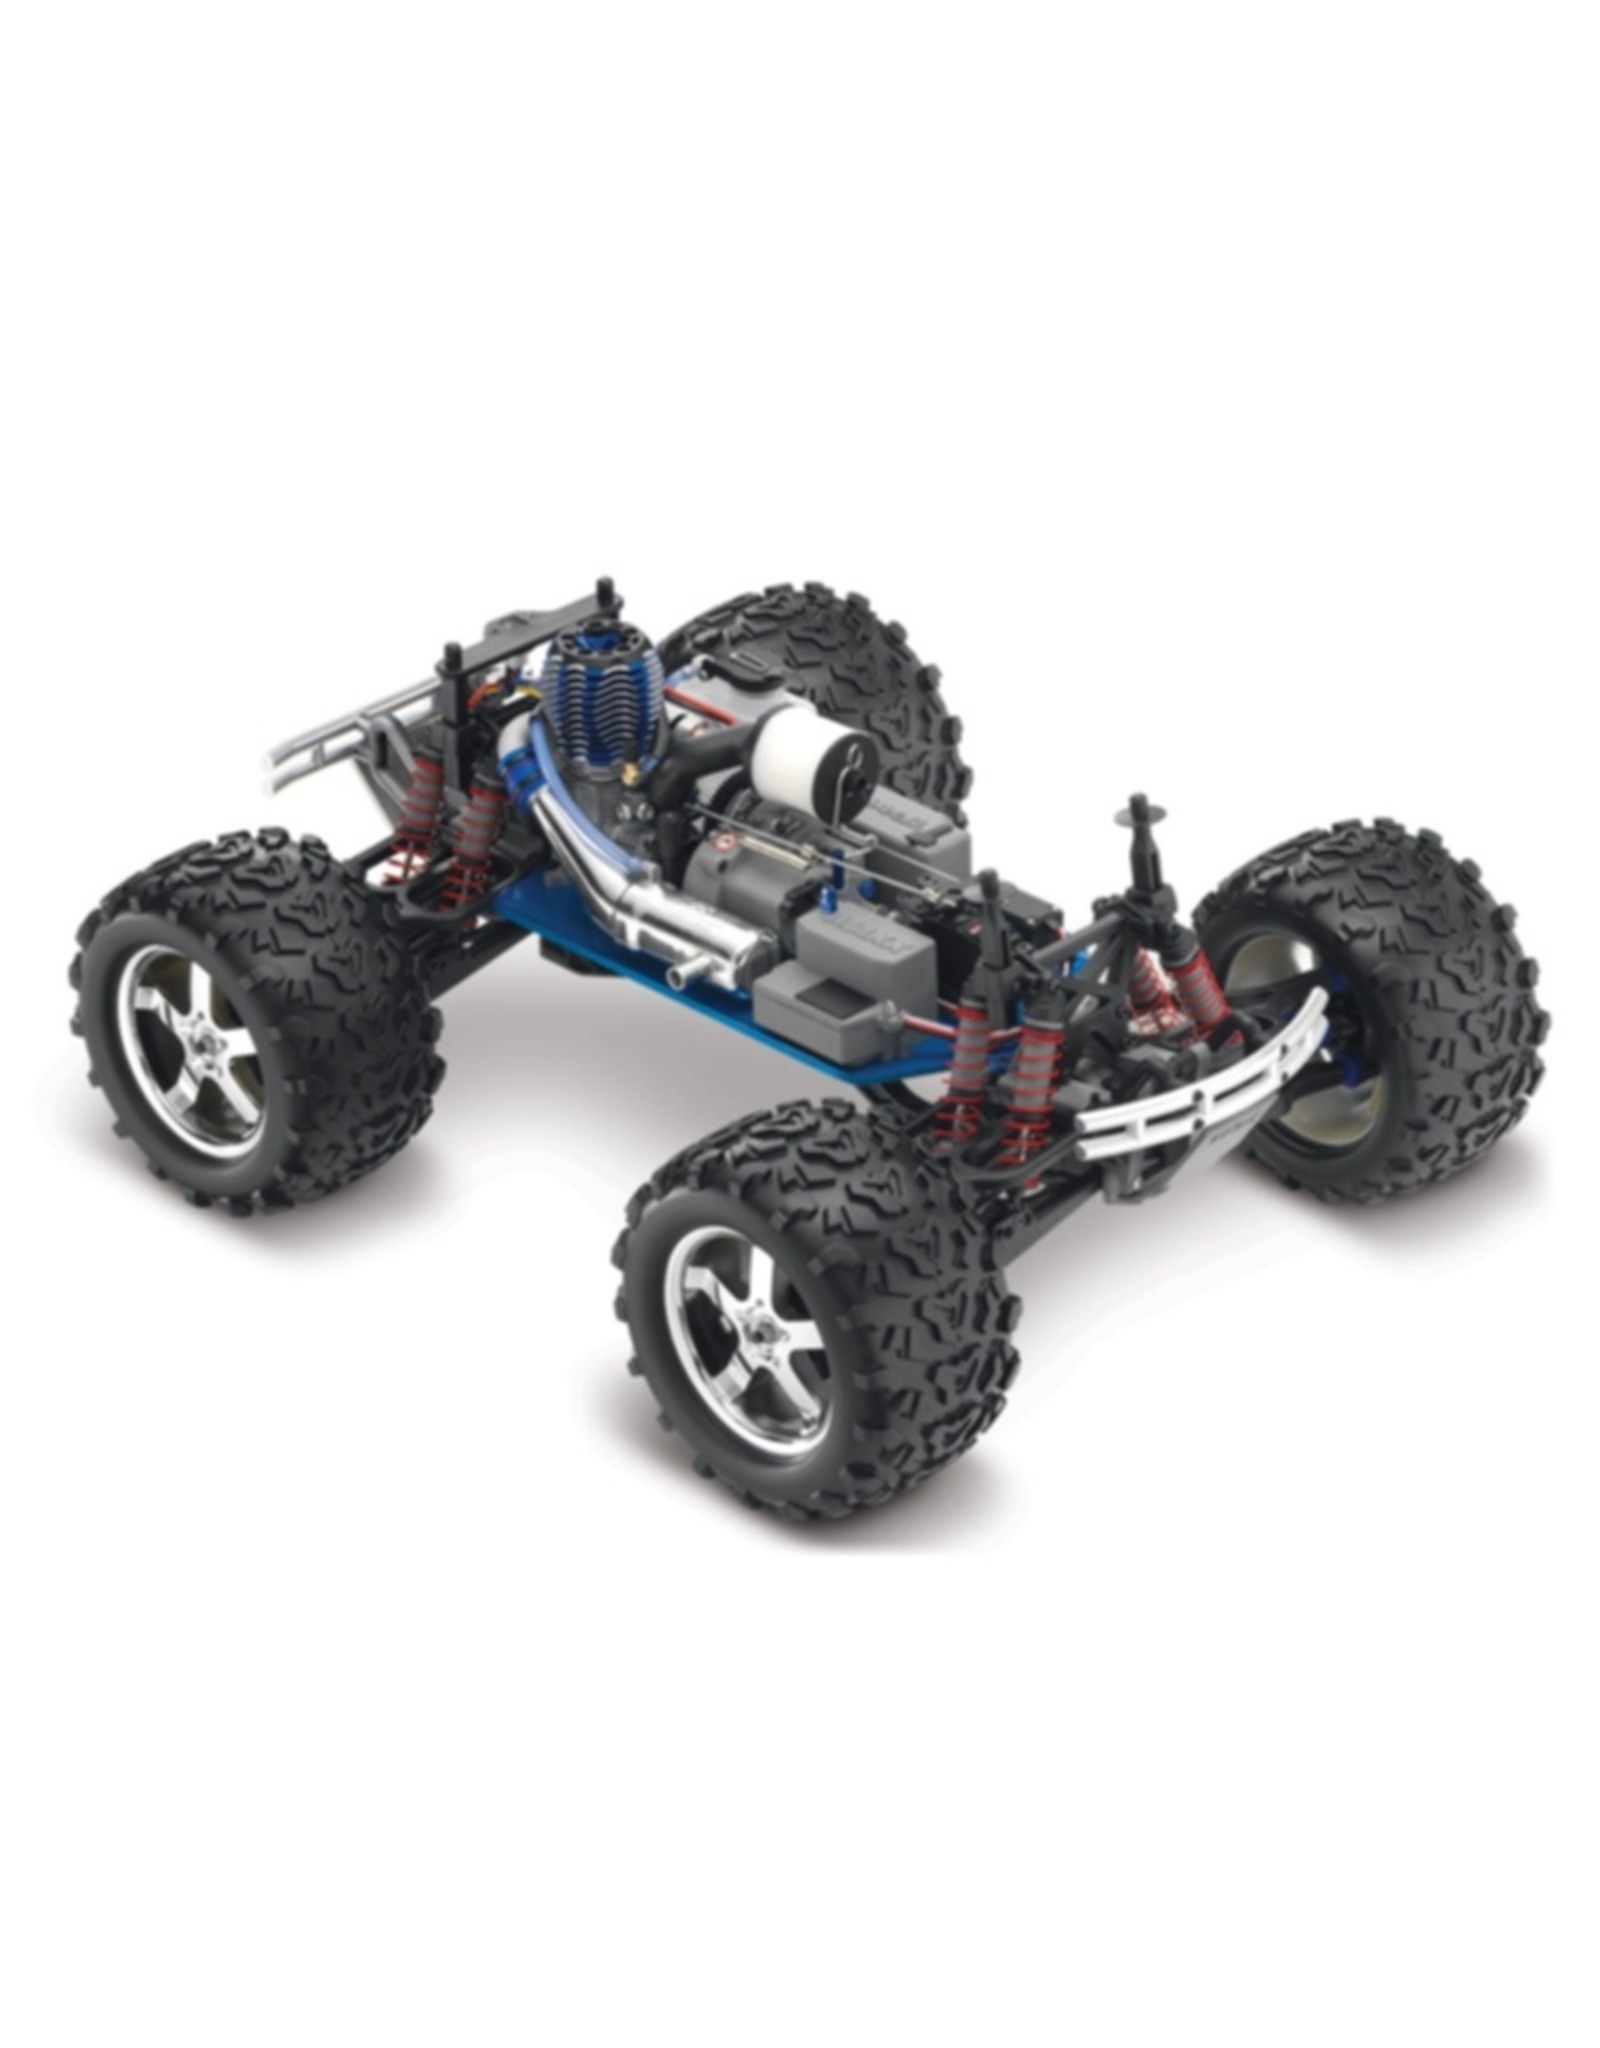 Traxxas TRA49077-3- BLUE - T-Maxx® 3.3: 1/10 Scale Nitro-Powered 4WD Maxx® Monster Truck. Ready-to-Race® with EZ-Start® electric starting system